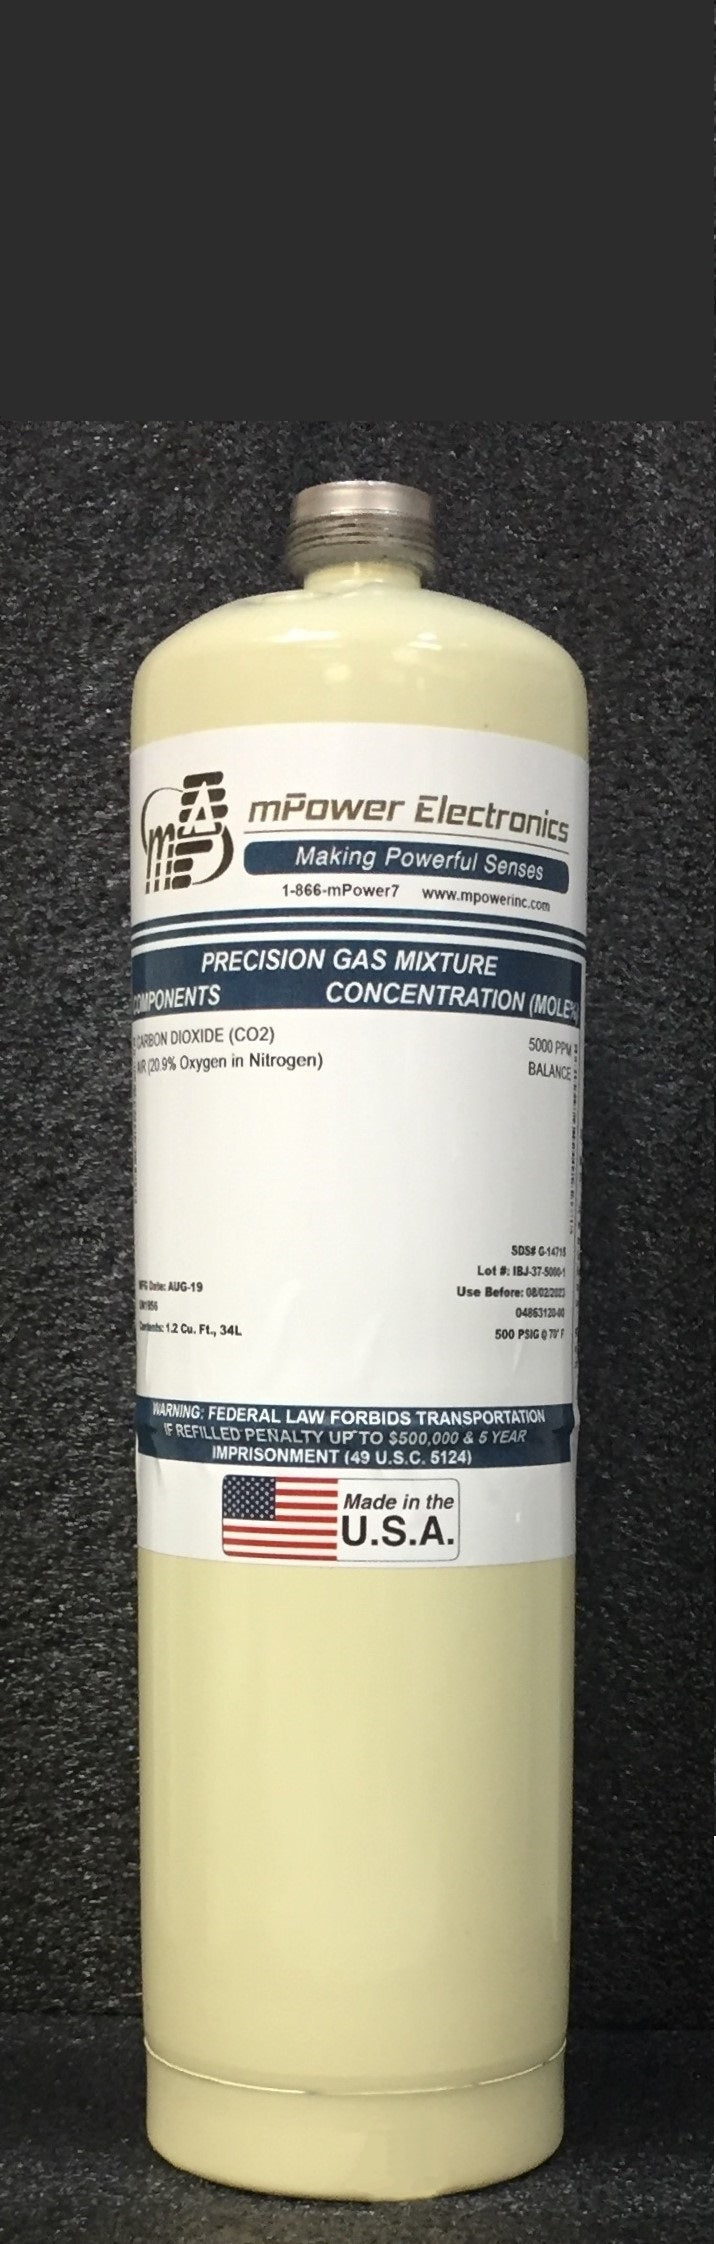 100 ppm Isobutylene/Bal air, C-10, 105L - Disposable cylinder